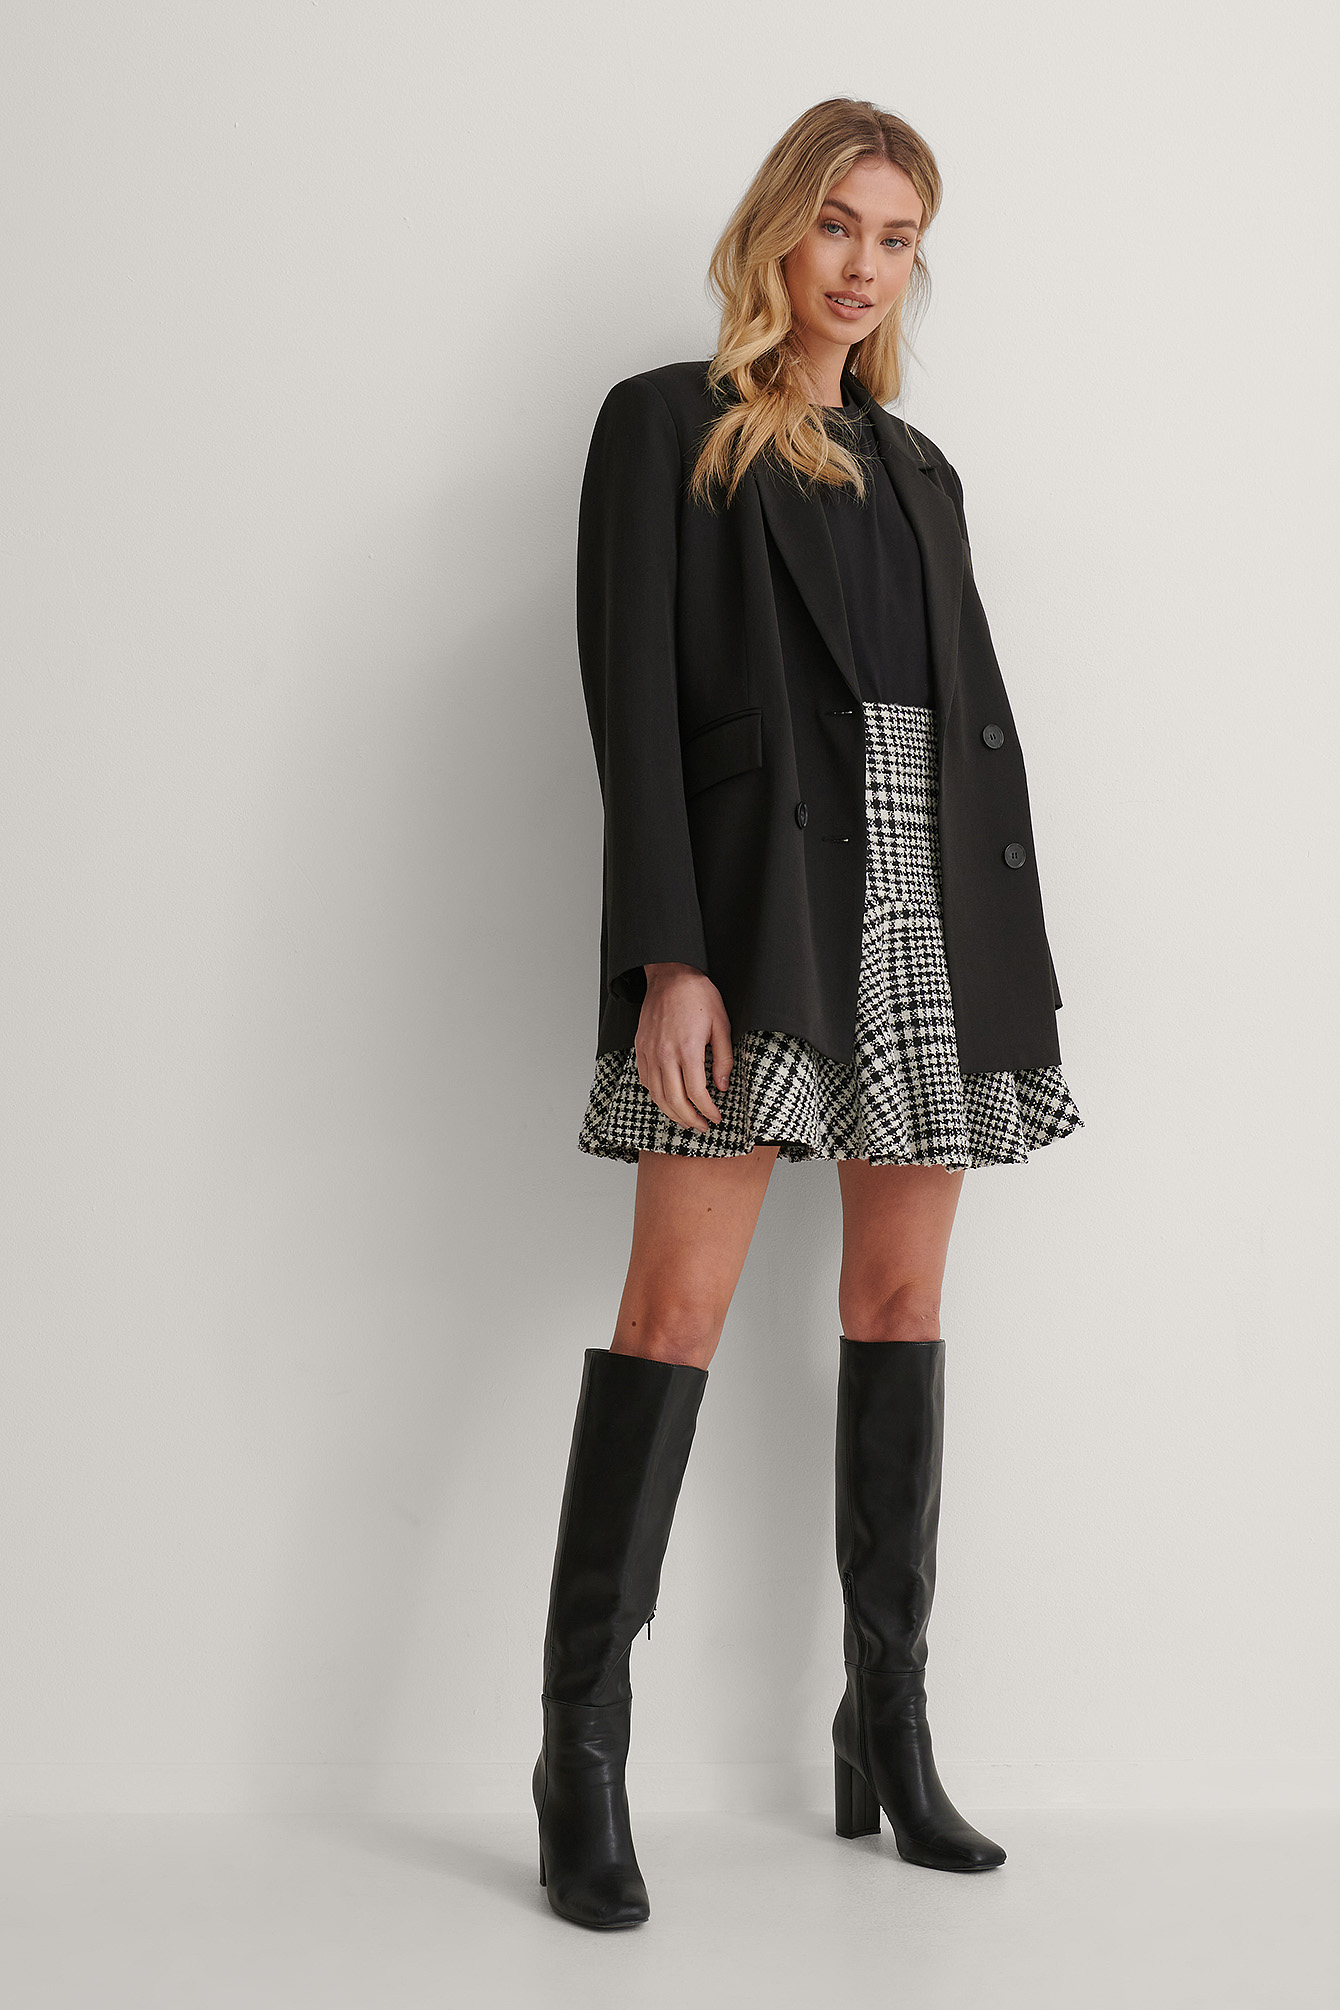 Dogtooth Tweed Skirt Outfit.